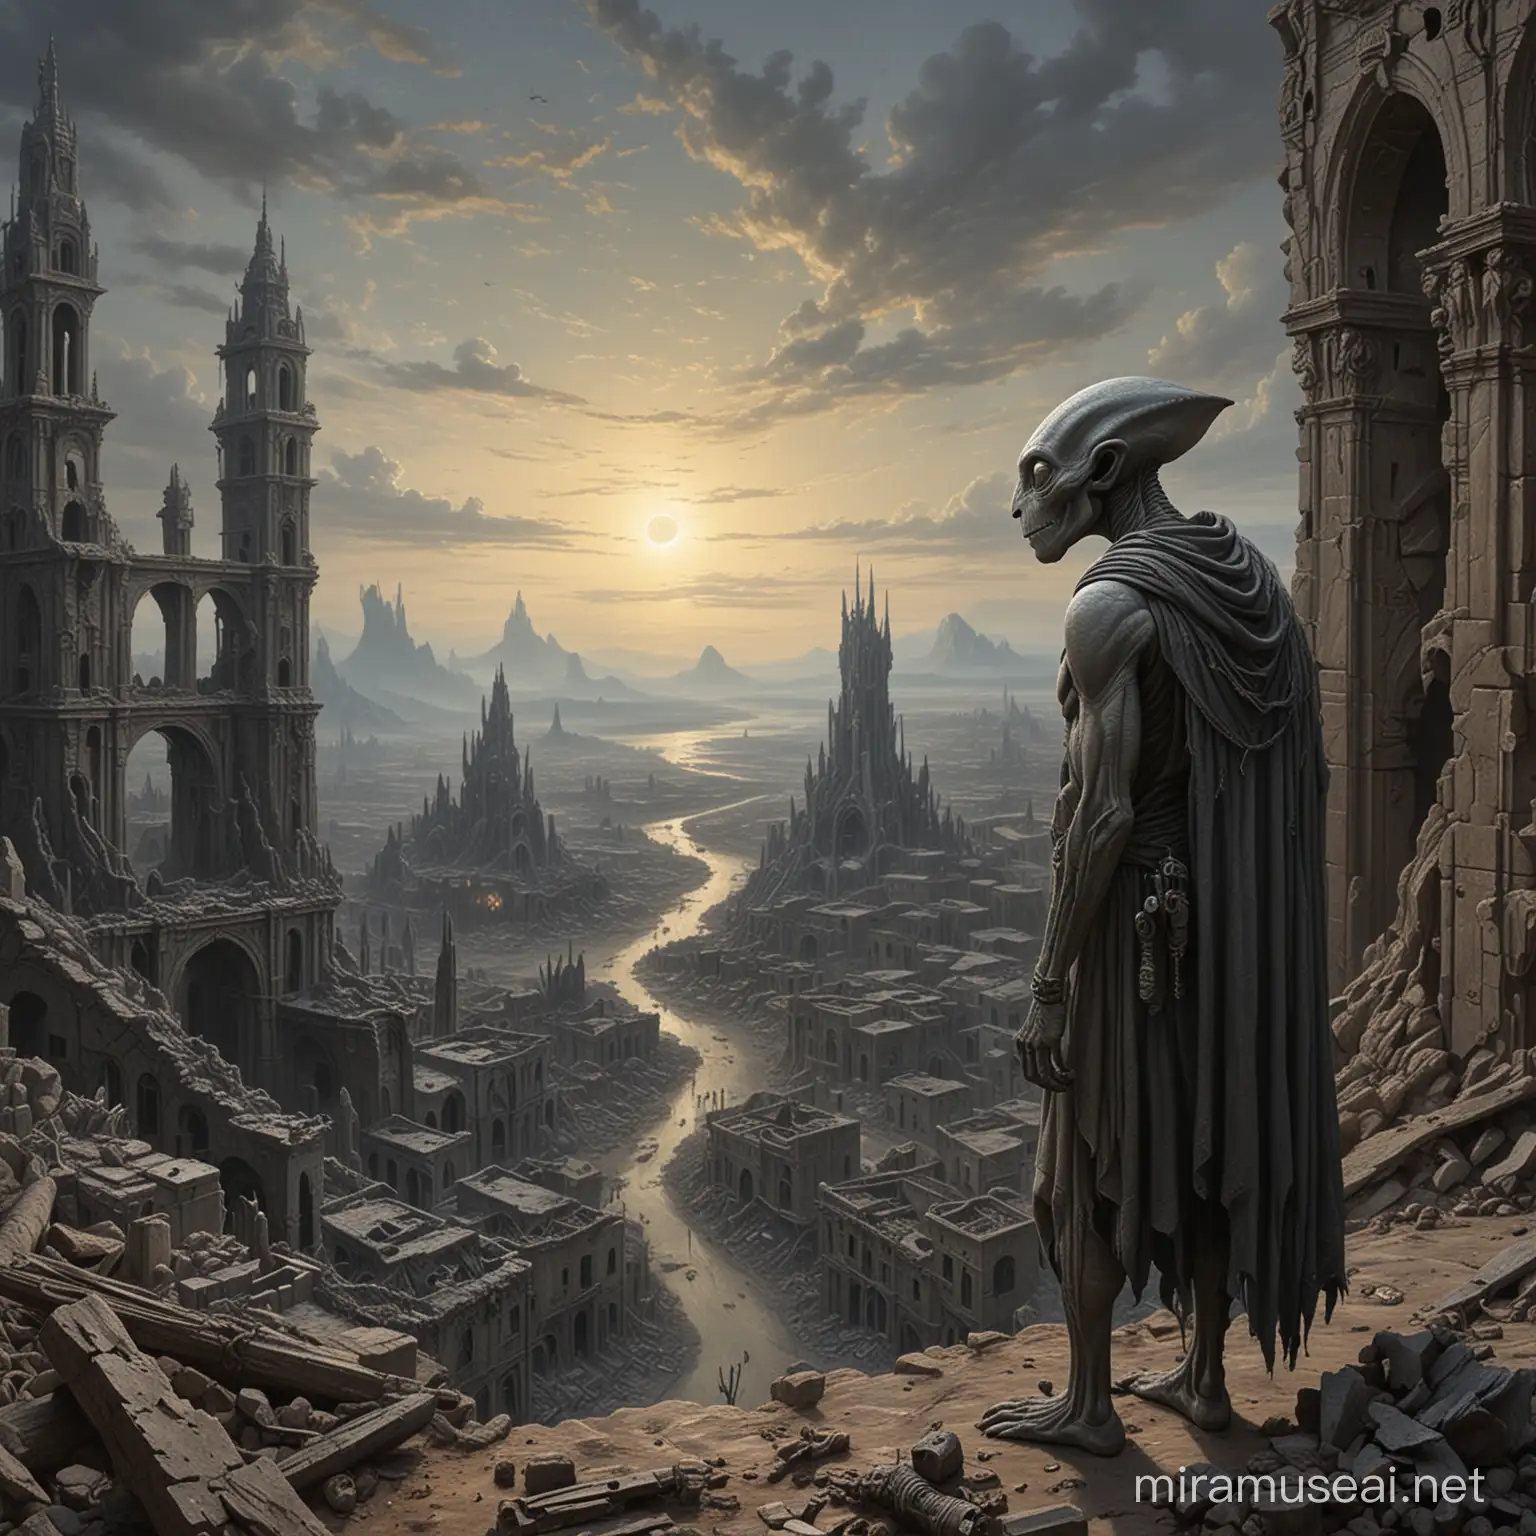 A gray alien surveying a ruined city on Earth, oil painting, detailed, in the style of Gustave Dore